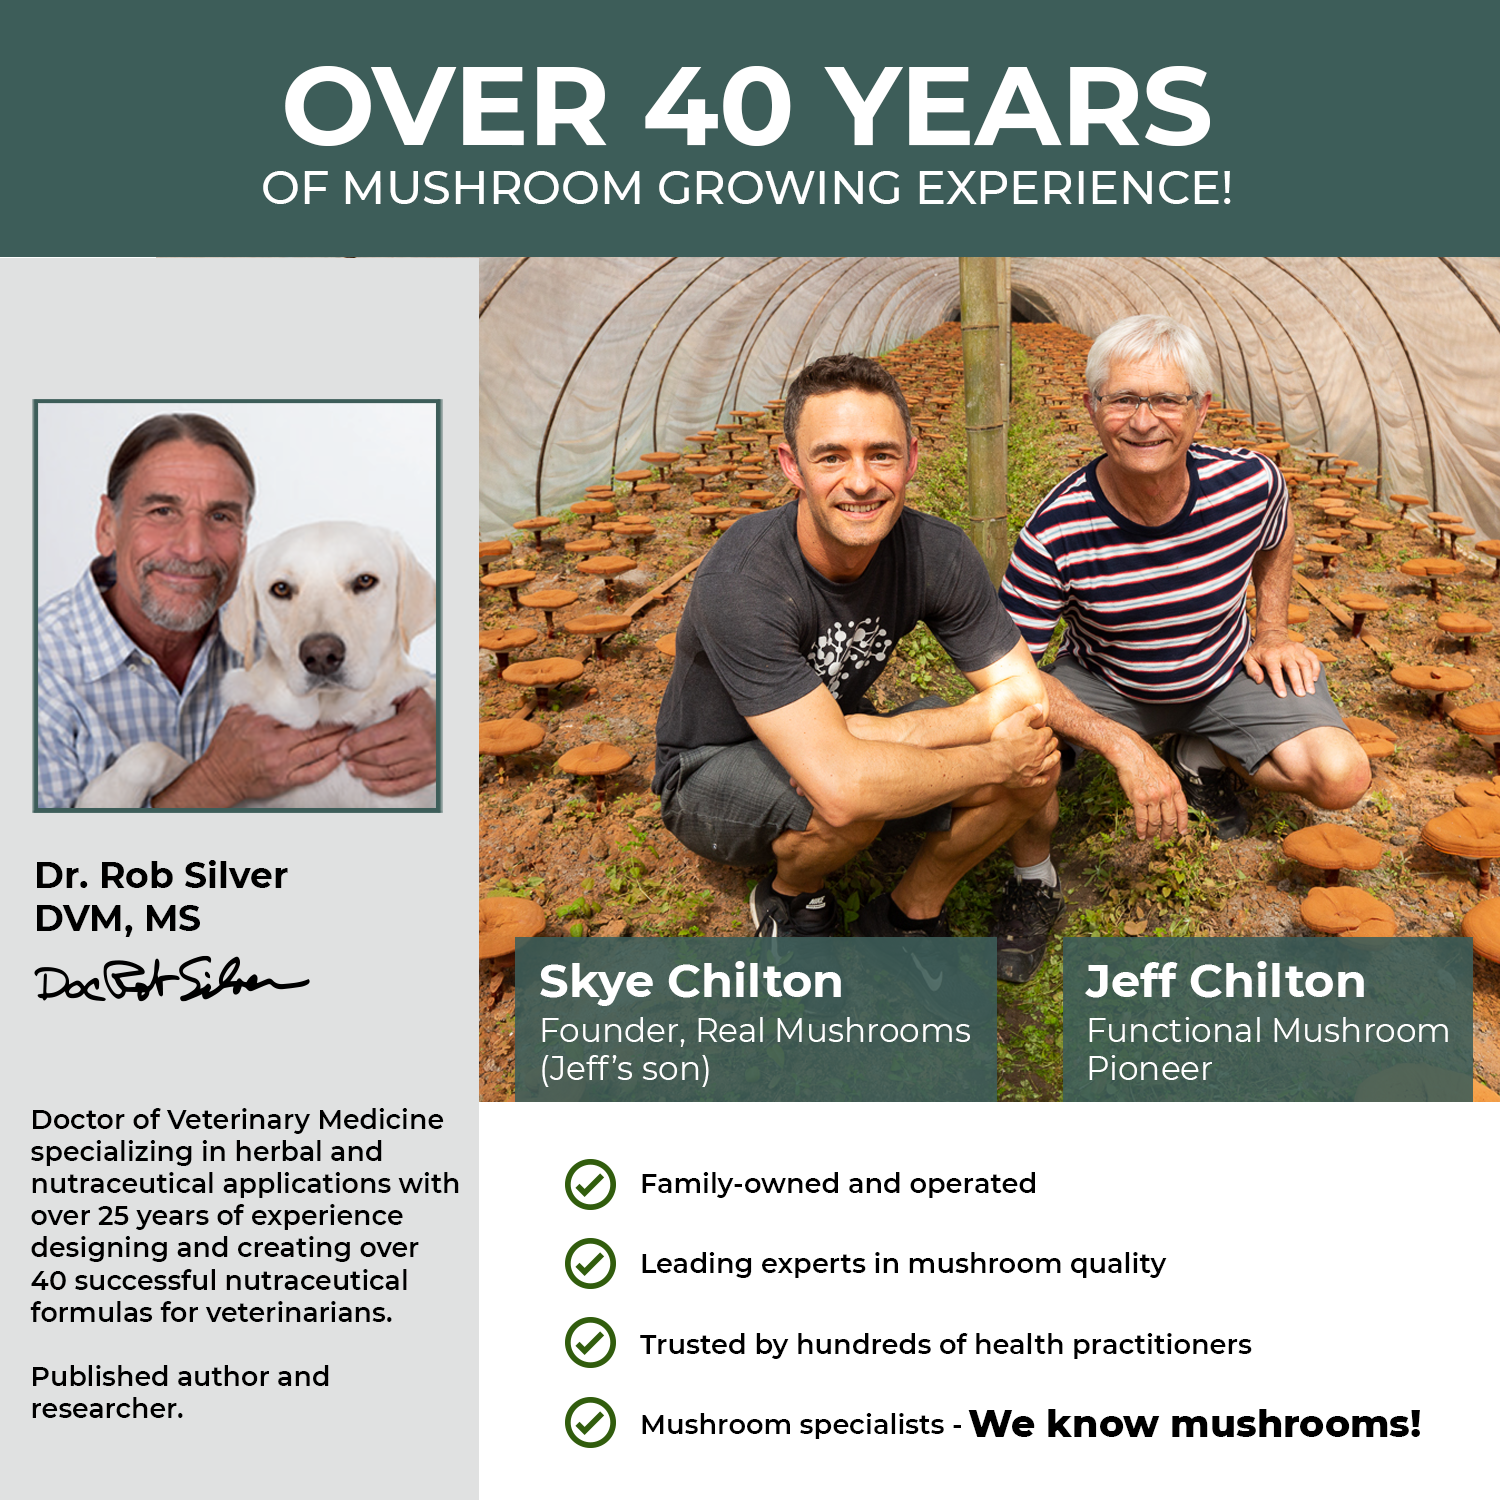 Over 40 years of Real Mushrooms' Turkey Tail Extract Capsules for Pets growing experience.